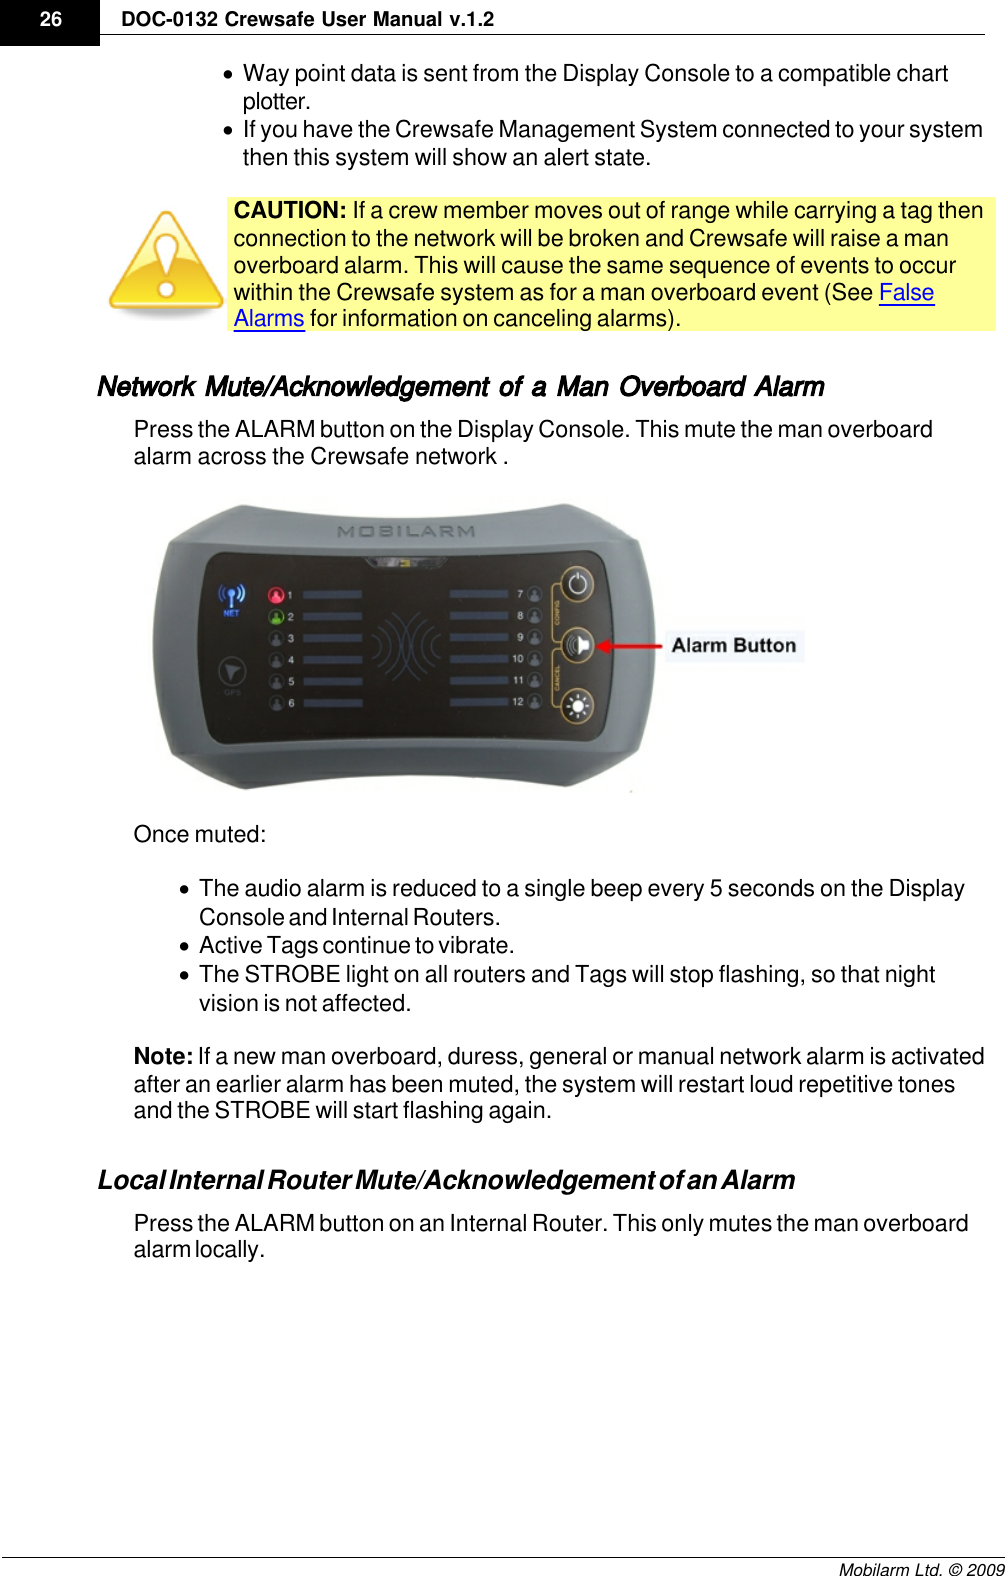 Draft26 DOC-0132 Crewsafe User Manual v.1.2Mobilarm Ltd. © 2009·Way point data is sent from the Display Console to a compatible chartplotter.·If you have the Crewsafe Management System connected to your systemthen this system will show an alert state. CAUTION: If a crew member moves out of range while carrying a tag thenconnection to the network will be broken and Crewsafe will raise a manoverboard alarm. This will cause the same sequence of events to occurwithin the Crewsafe system as for a man overboard event (See FalseAlarms for information on canceling alarms). Network Mute/Acknowledgement of a Man Overboard Alarm Press the ALARM button on the Display Console. This mute the man overboardalarm across the Crewsafe network .Once muted:·The audio alarm is reduced to a single beep every 5 seconds on the DisplayConsole and Internal Routers.·Active Tags continue to vibrate.·The STROBE light on all routers and Tags will stop flashing, so that nightvision is not affected.Note: If a new man overboard, duress, general or manual network alarm is activatedafter an earlier alarm has been muted, the system will restart loud repetitive tonesand the STROBE will start flashing again.Local Internal Router Mute/Acknowledgement of an AlarmPress the ALARM button on an Internal Router. This only mutes the man overboardalarm locally.